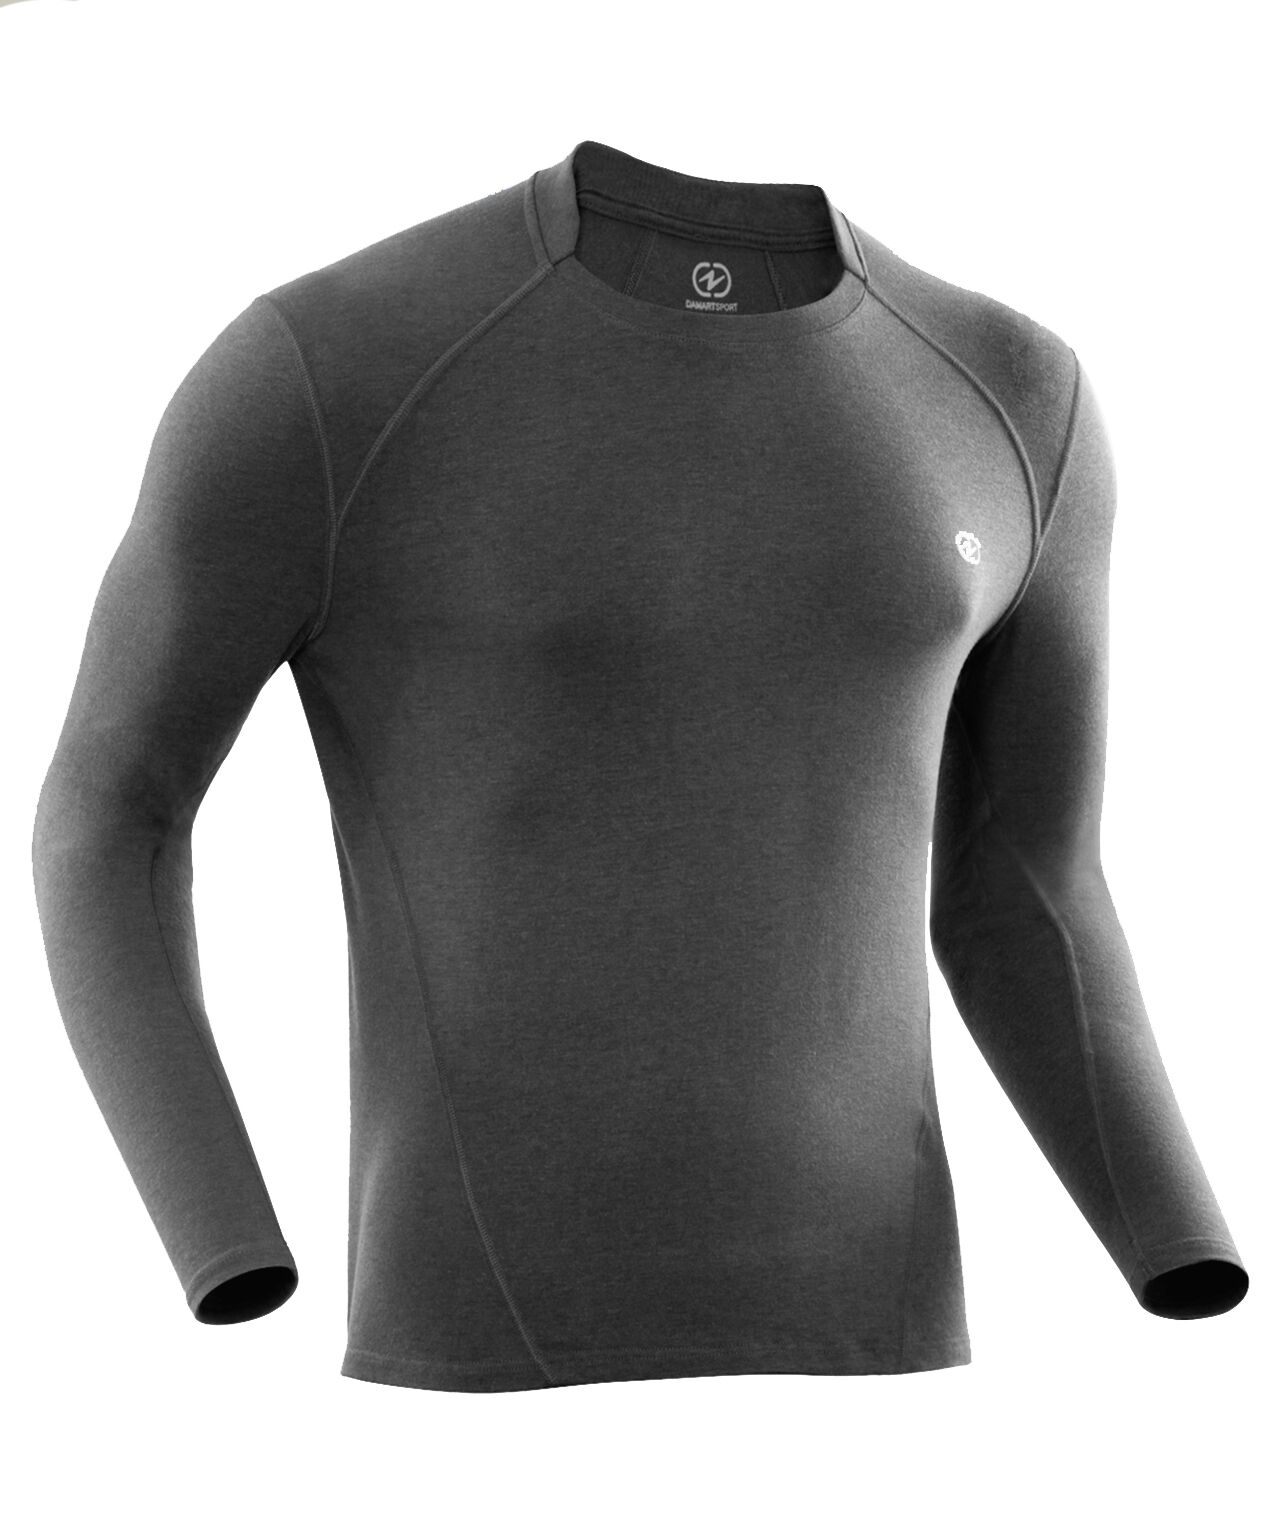 Damart, Tee-shirt Thermolactyl homme Activ body 4.